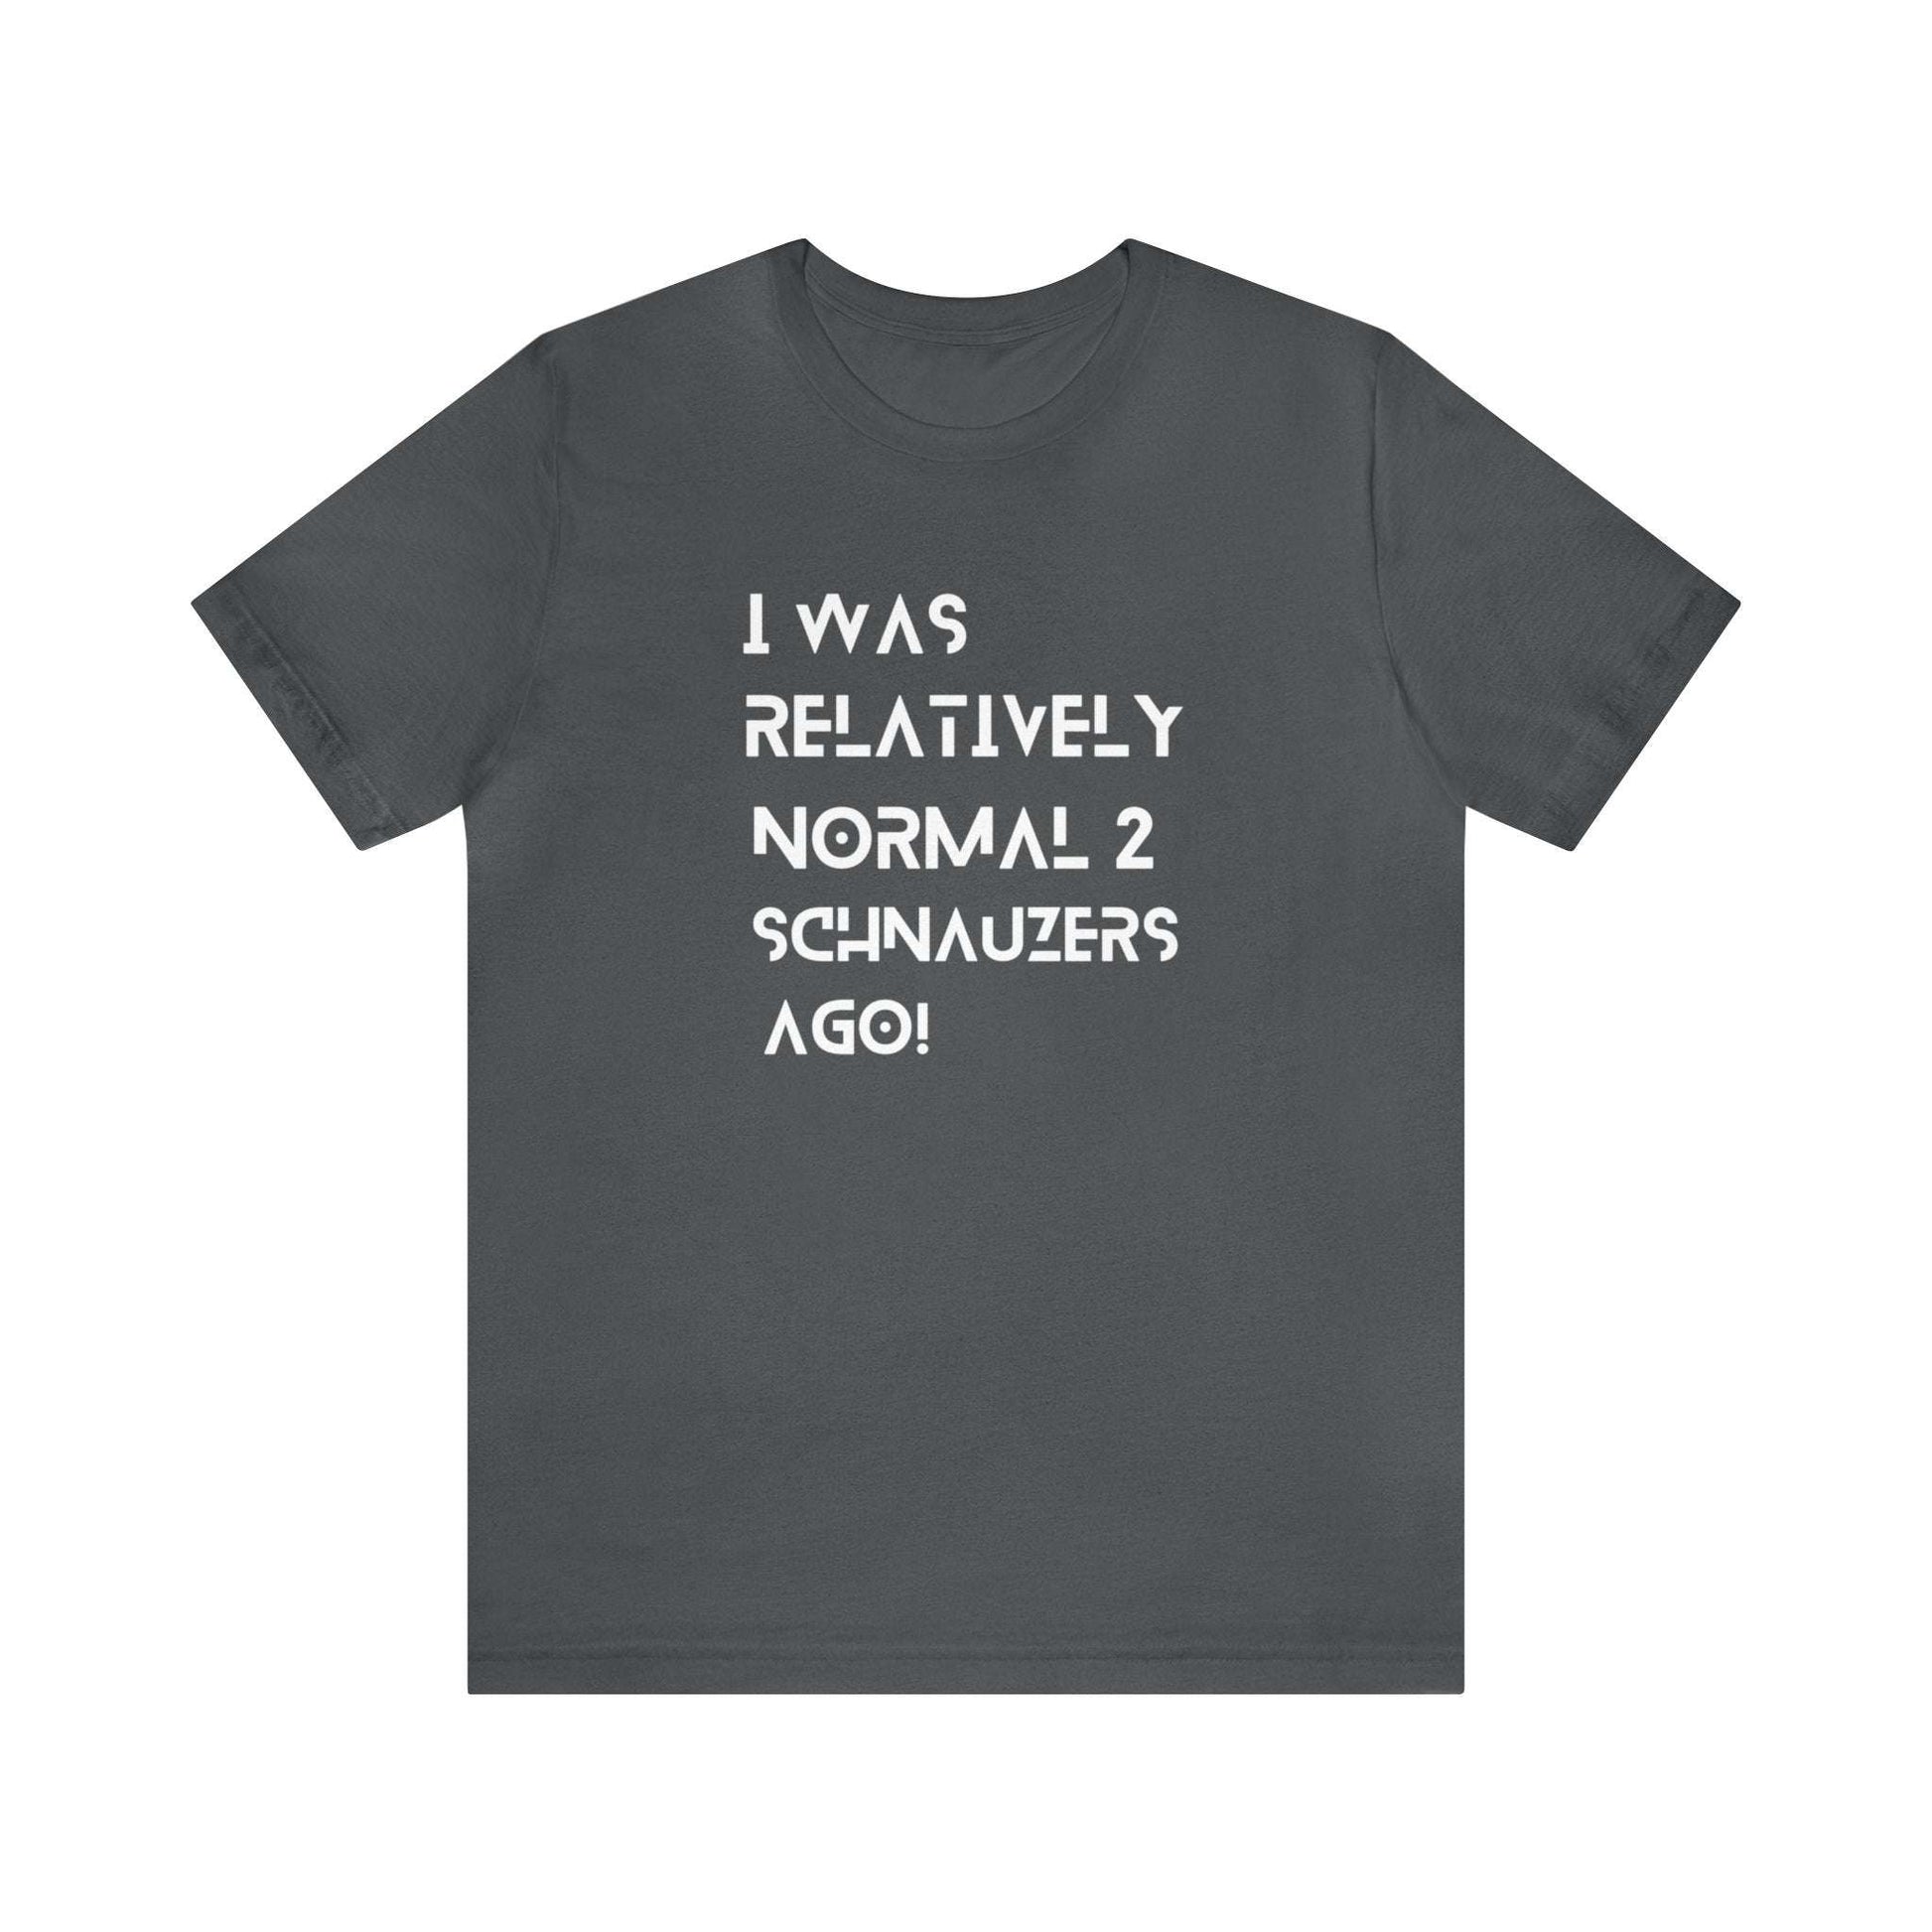 Fabulous Tee Shirts' 'I Was Relatively Normal 2 Schnauzers Ago' grey t-shirt displayed to emphasize its superior quality.